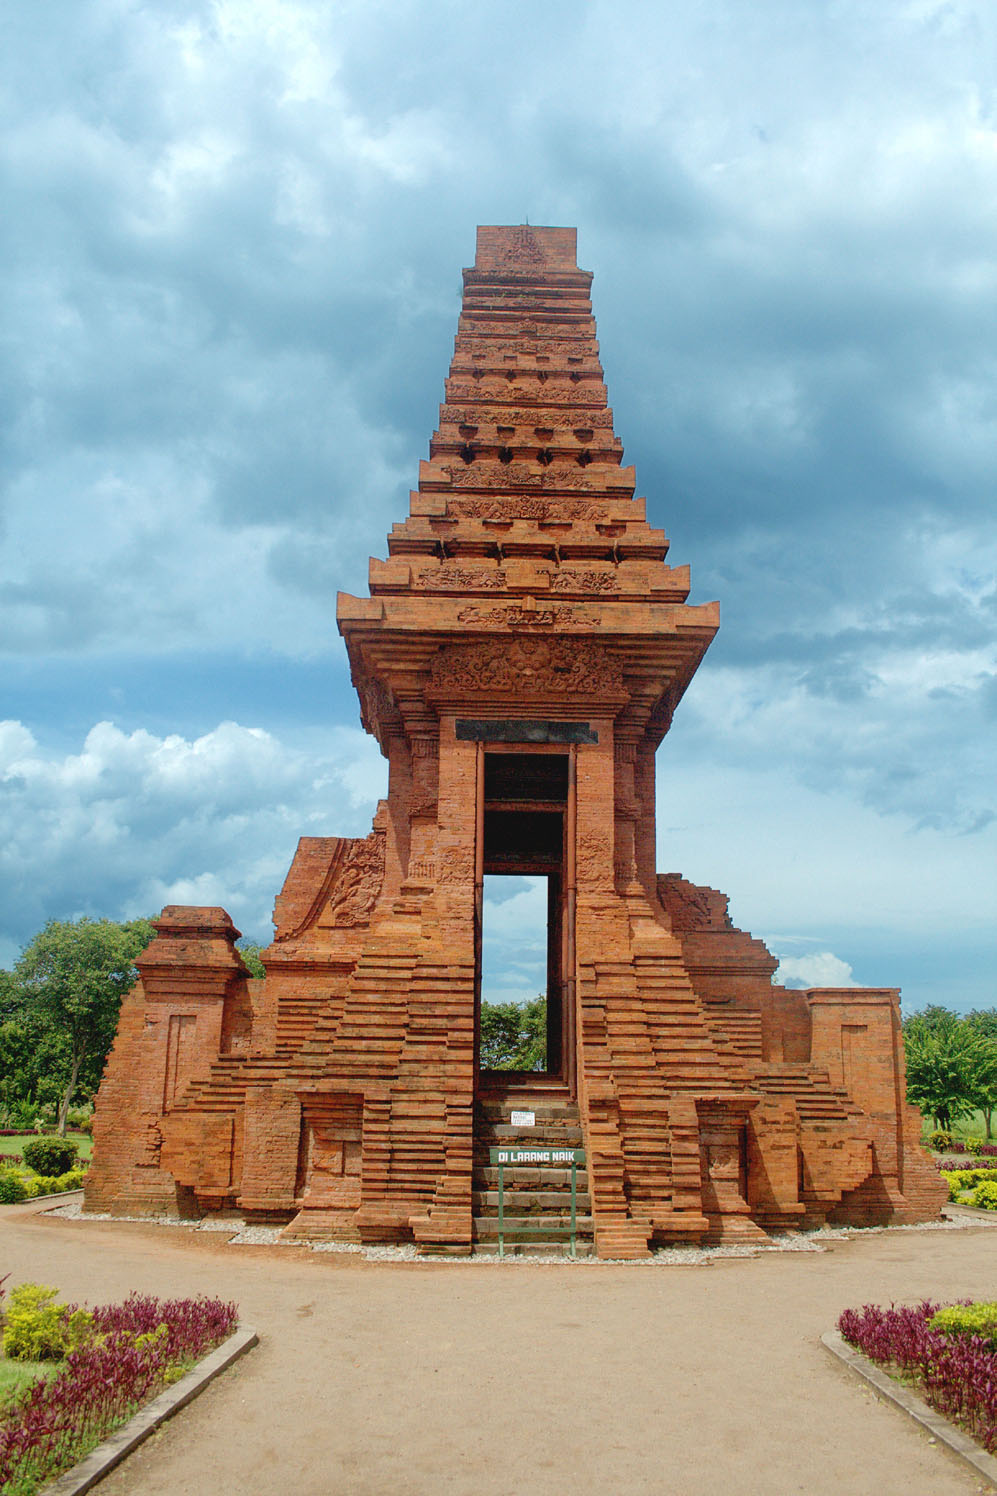 Trowulan Archaeological Site